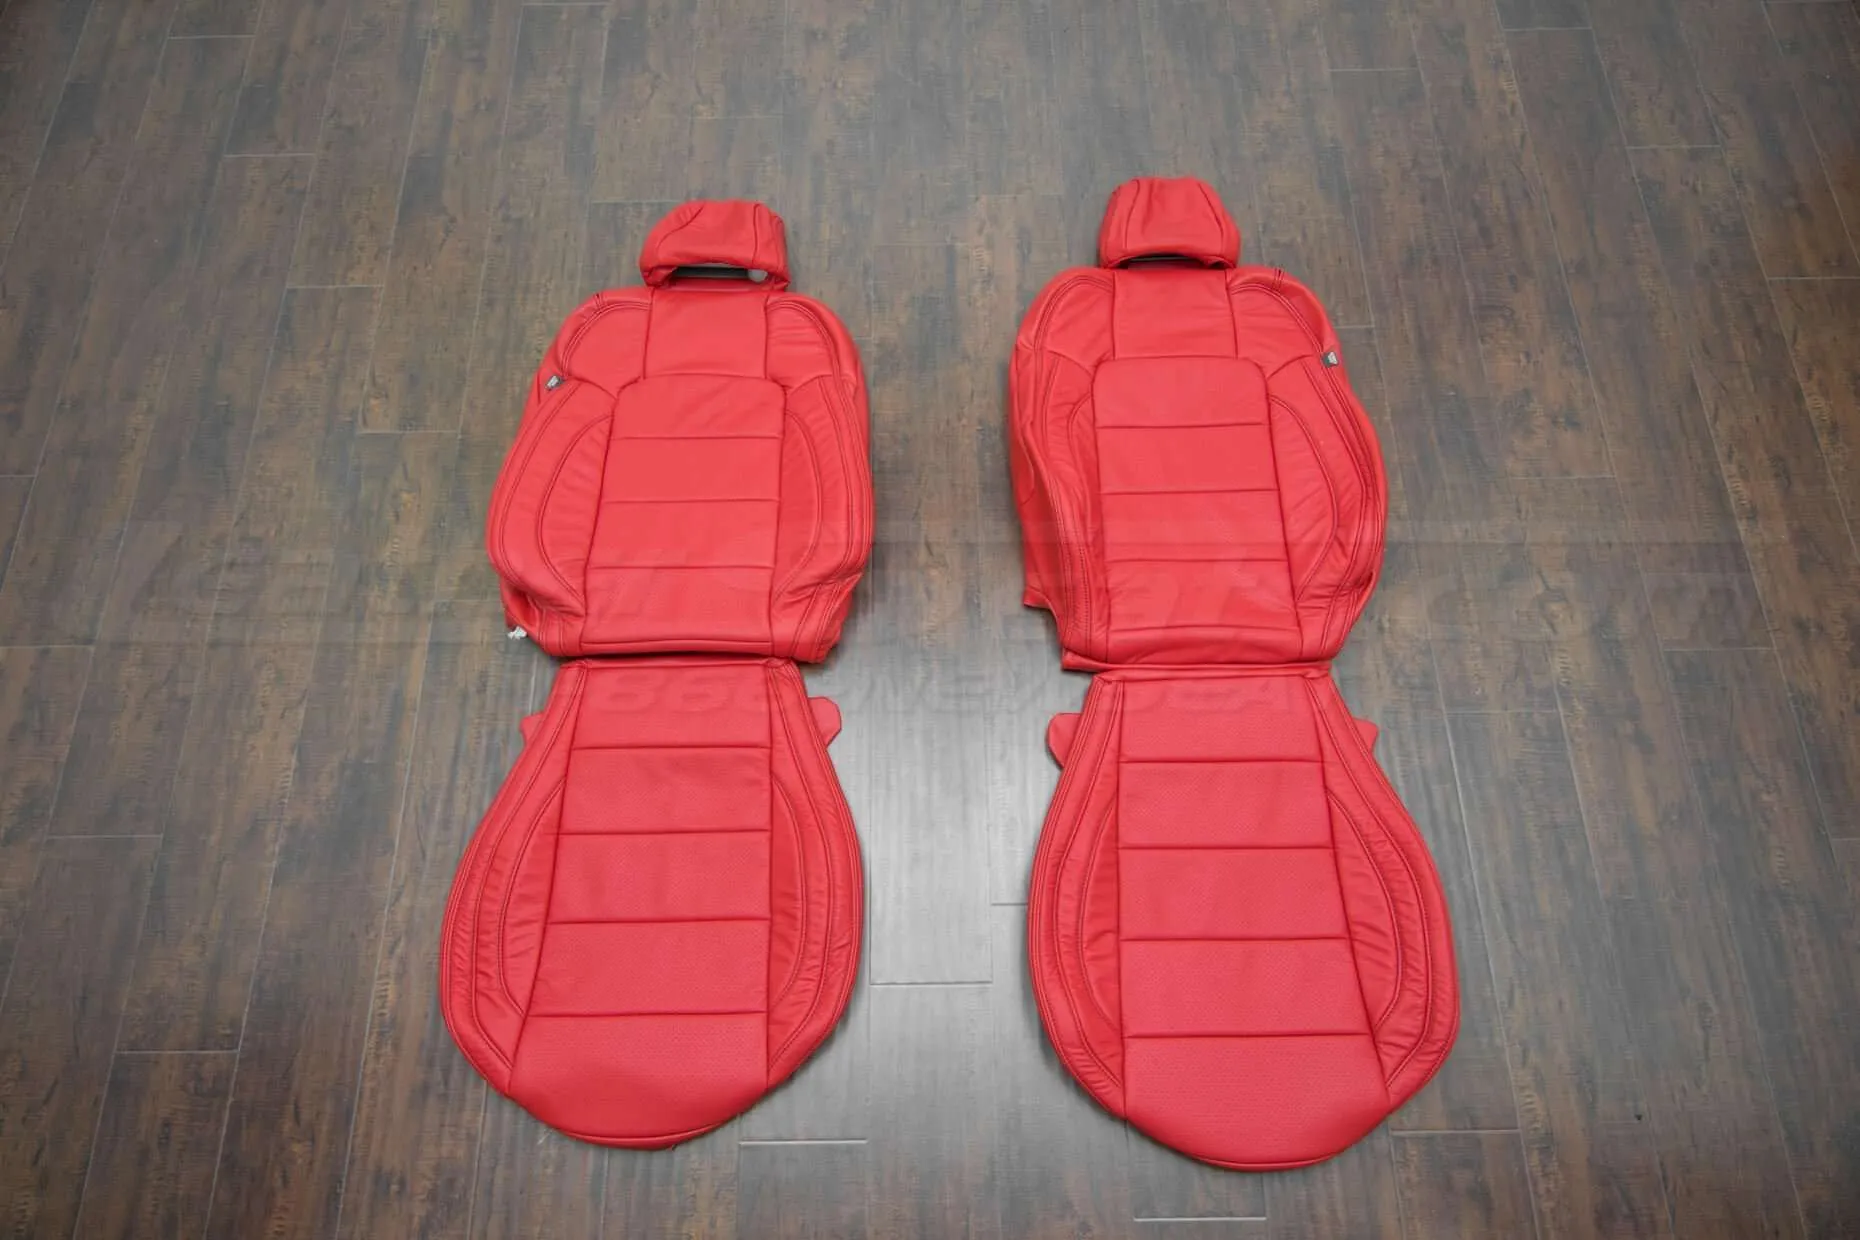 Ford Mustang Bright Red Upholstery Kit - Front seats